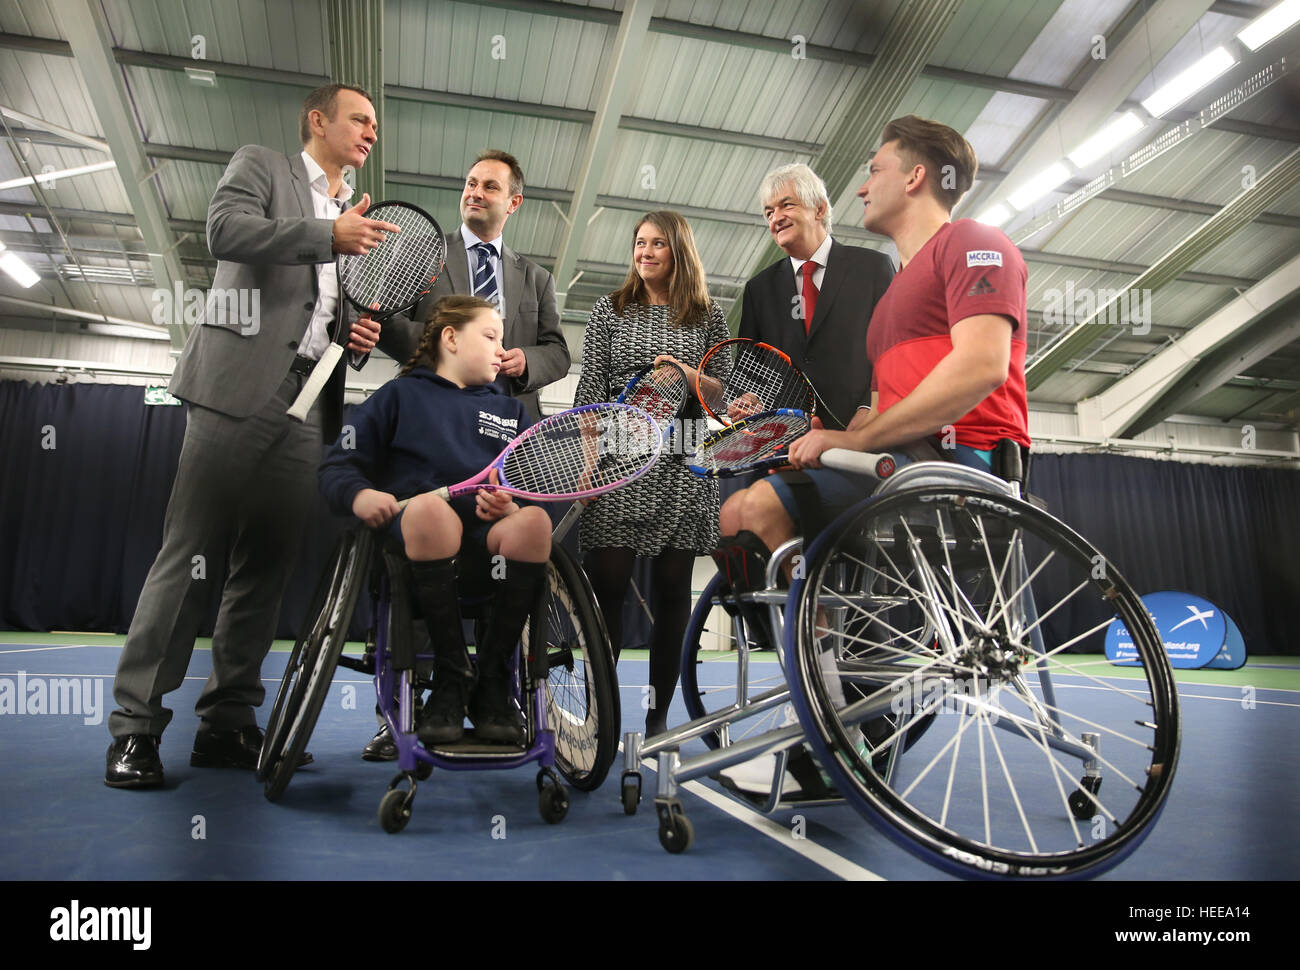 Paralympic, Wimbledon, Australian Open champion and Wheelchair Singles World Number One Gordon Reid (front right), Ellie Robertson (front left) with back row (left-right) Tennis ScotlandÂ’s Chair Blane Dodds, LTA Participation Director Alastair Marks , Minister for Sport Aileen Campbell and sportscotland Chair Mel Young during a photocall at an announcement at the Gannochy National Tennis Centre at the University of Stirling where the Boards of the LTA and sportscotland have approved a historic multi-million pound deal to grow the sport of tennis in Scotland and facilitate year-round play. Stock Photo